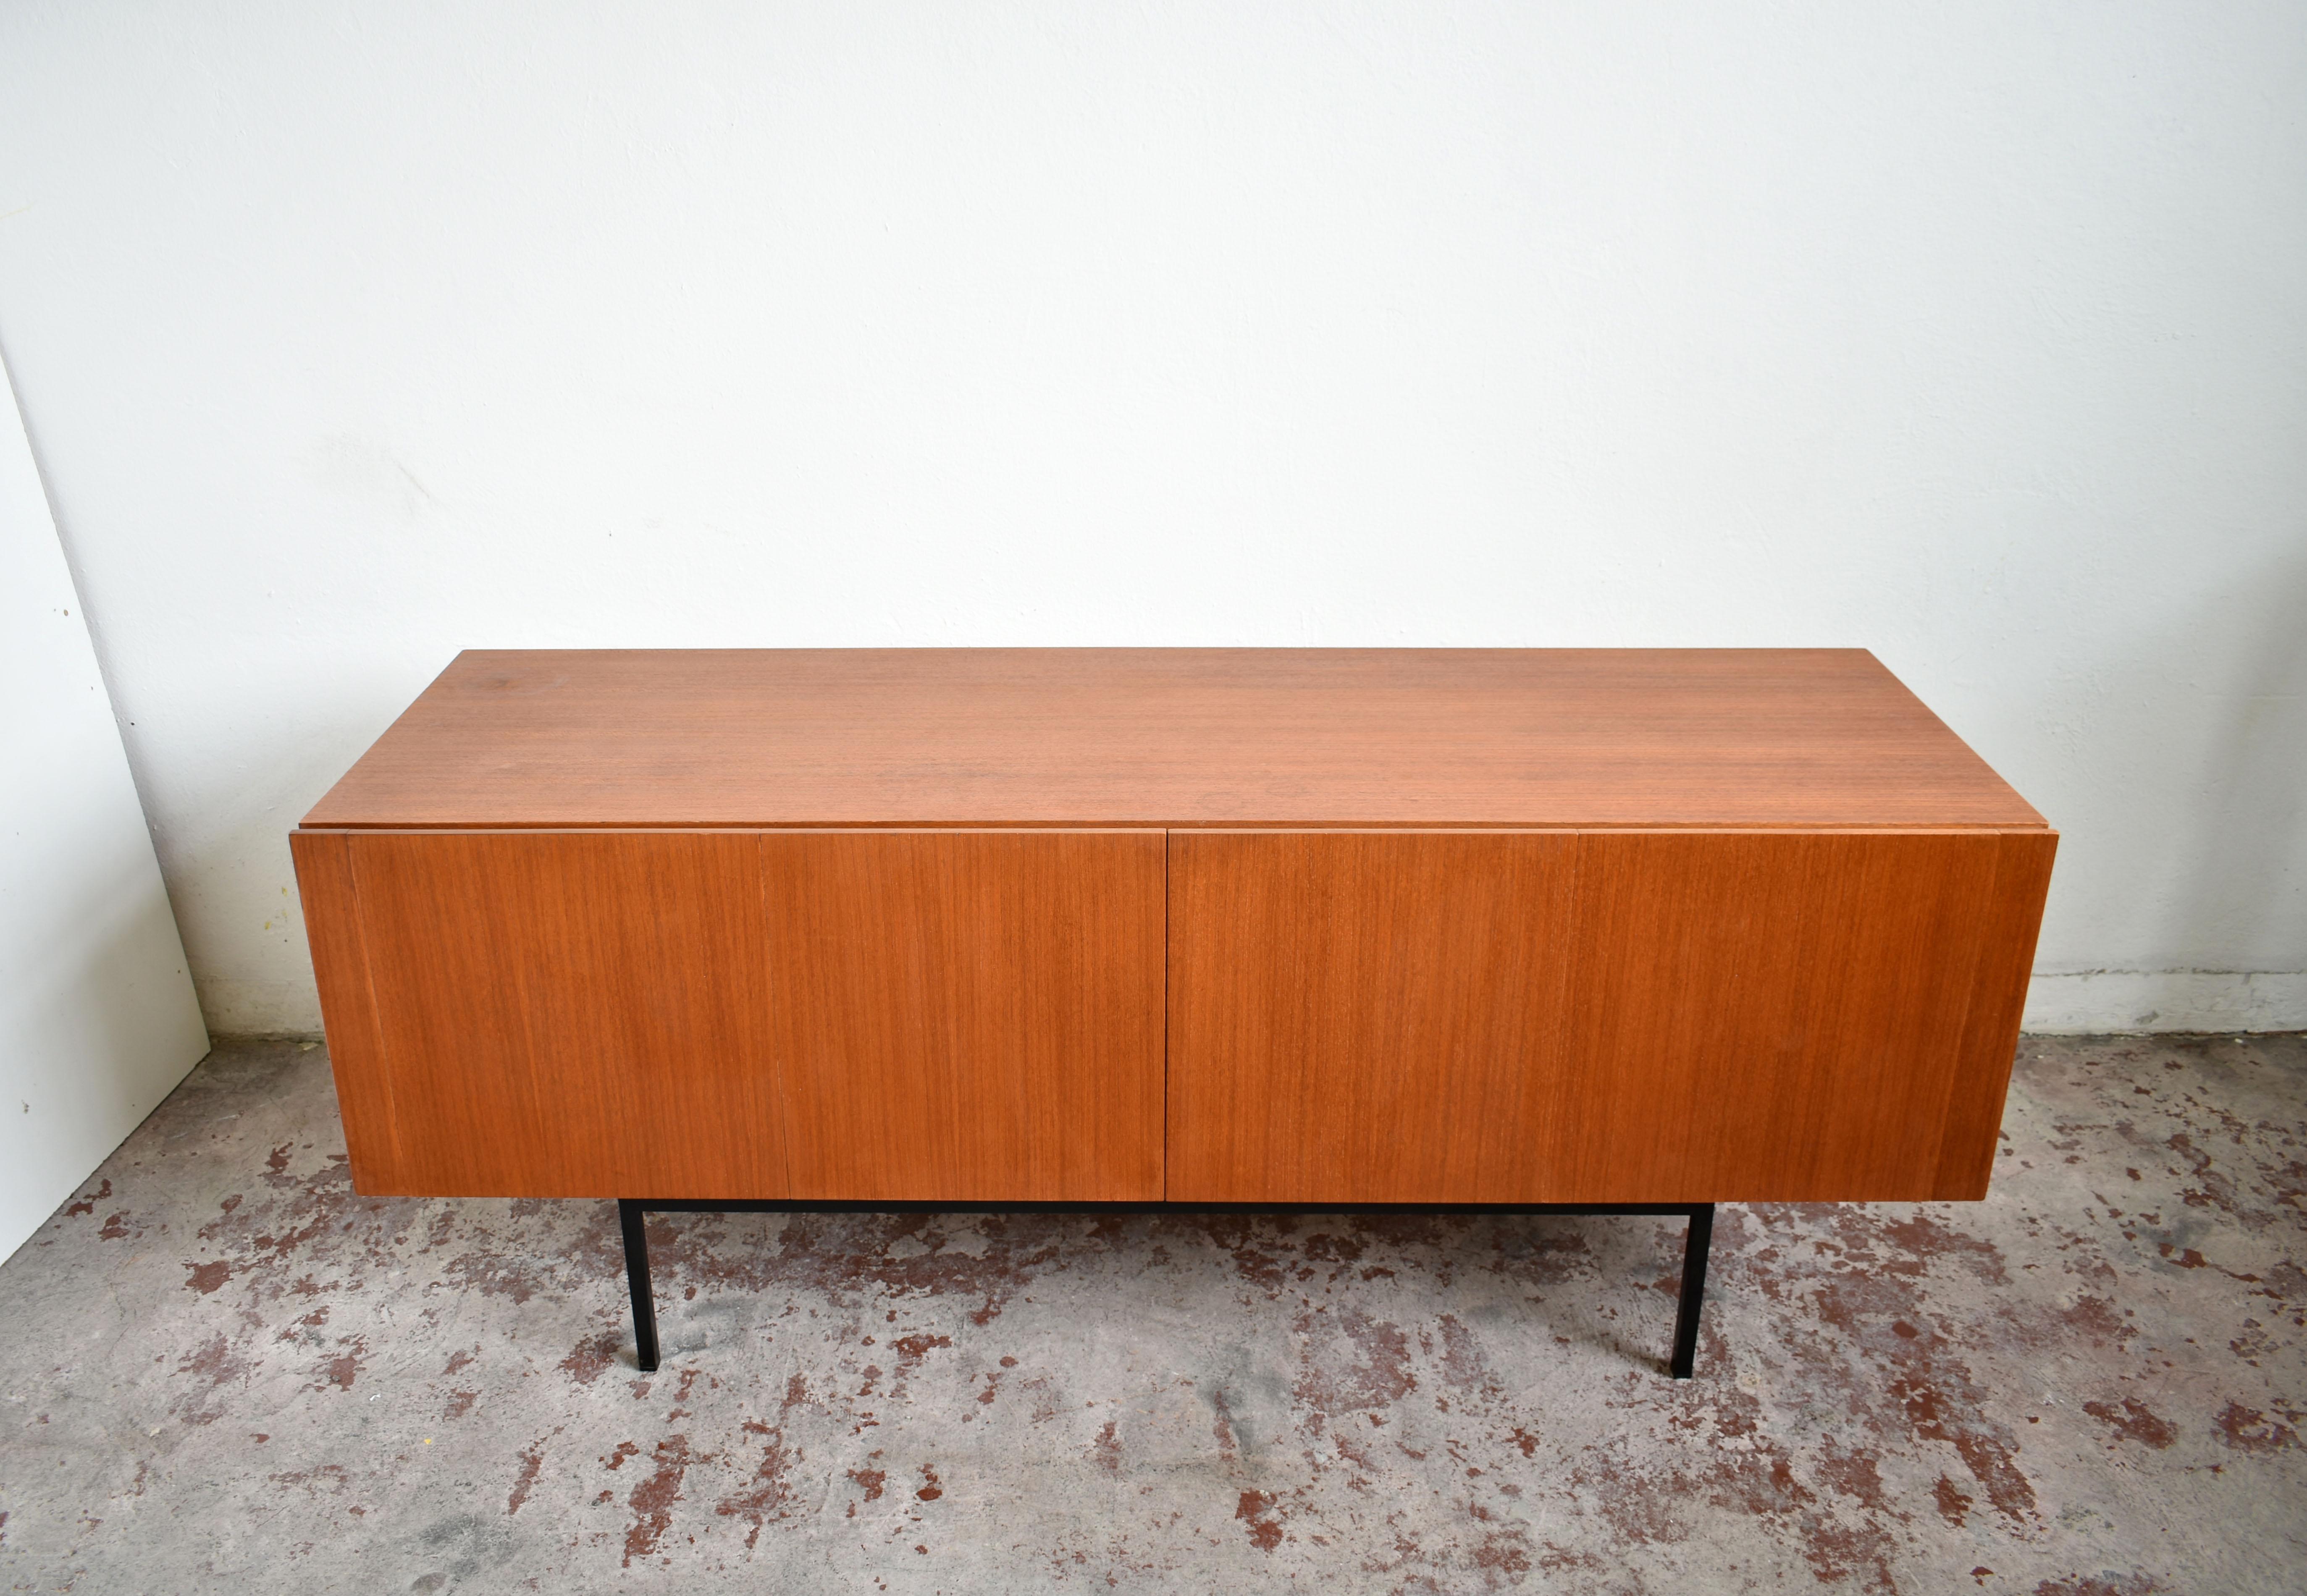 B20 sideboard is part of a furniture series designed in the late 1950s by the Swiss designer Dieter Waeckerlin for the German high-end furniture manufacturer Behr Möbel.

The design that Dieter Waeckerlin made for Behr is famous for it's very